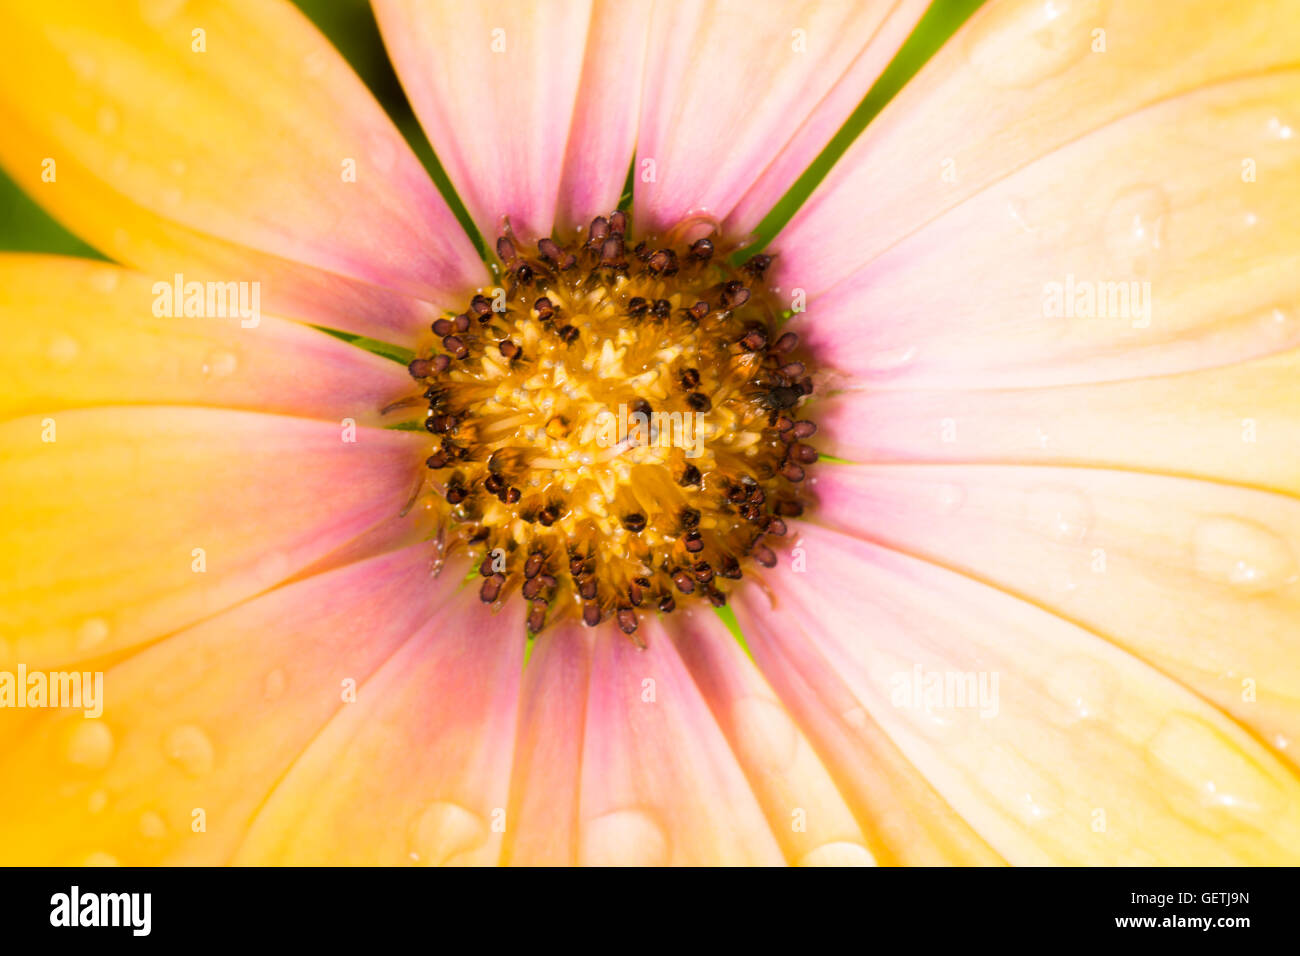 Floral background with petals of a yellow osteospermum flower Stock Photo